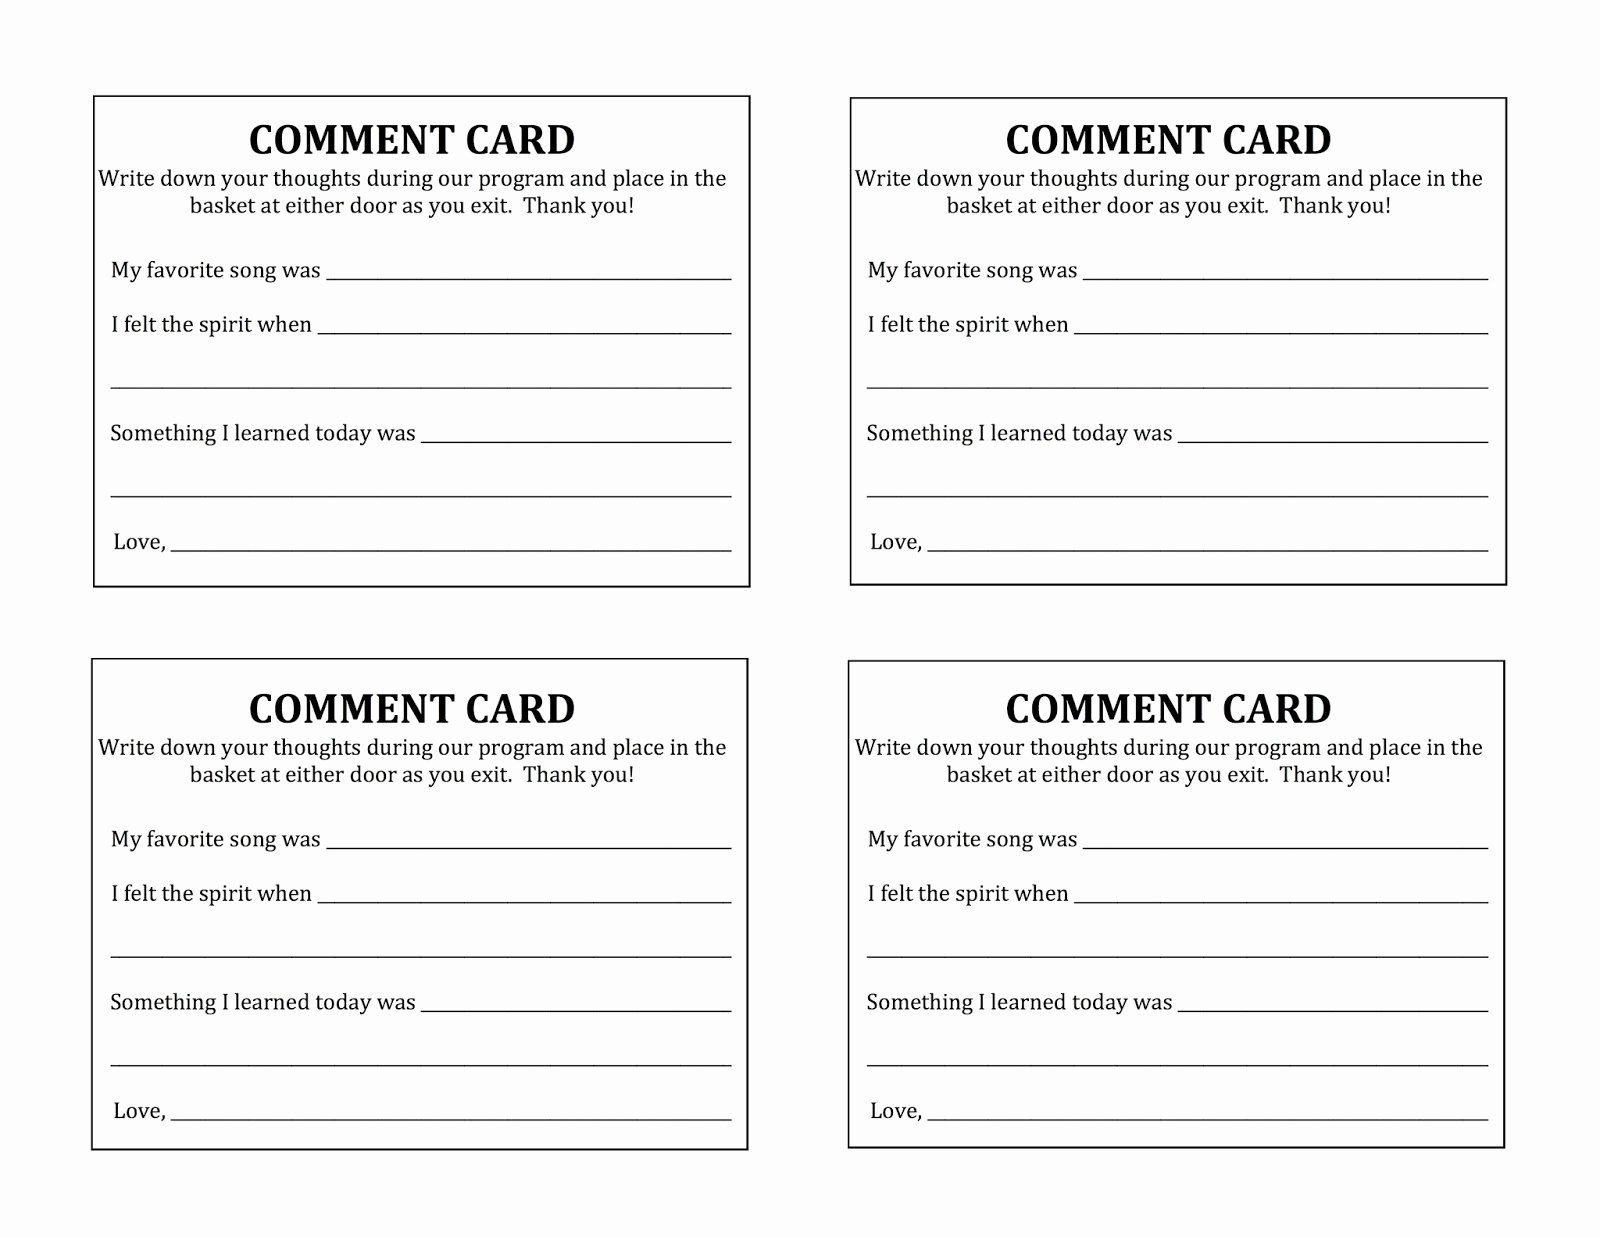 Restaurant Comment Card Template New Camille S Primary Ideas Primary Program 2015 Program